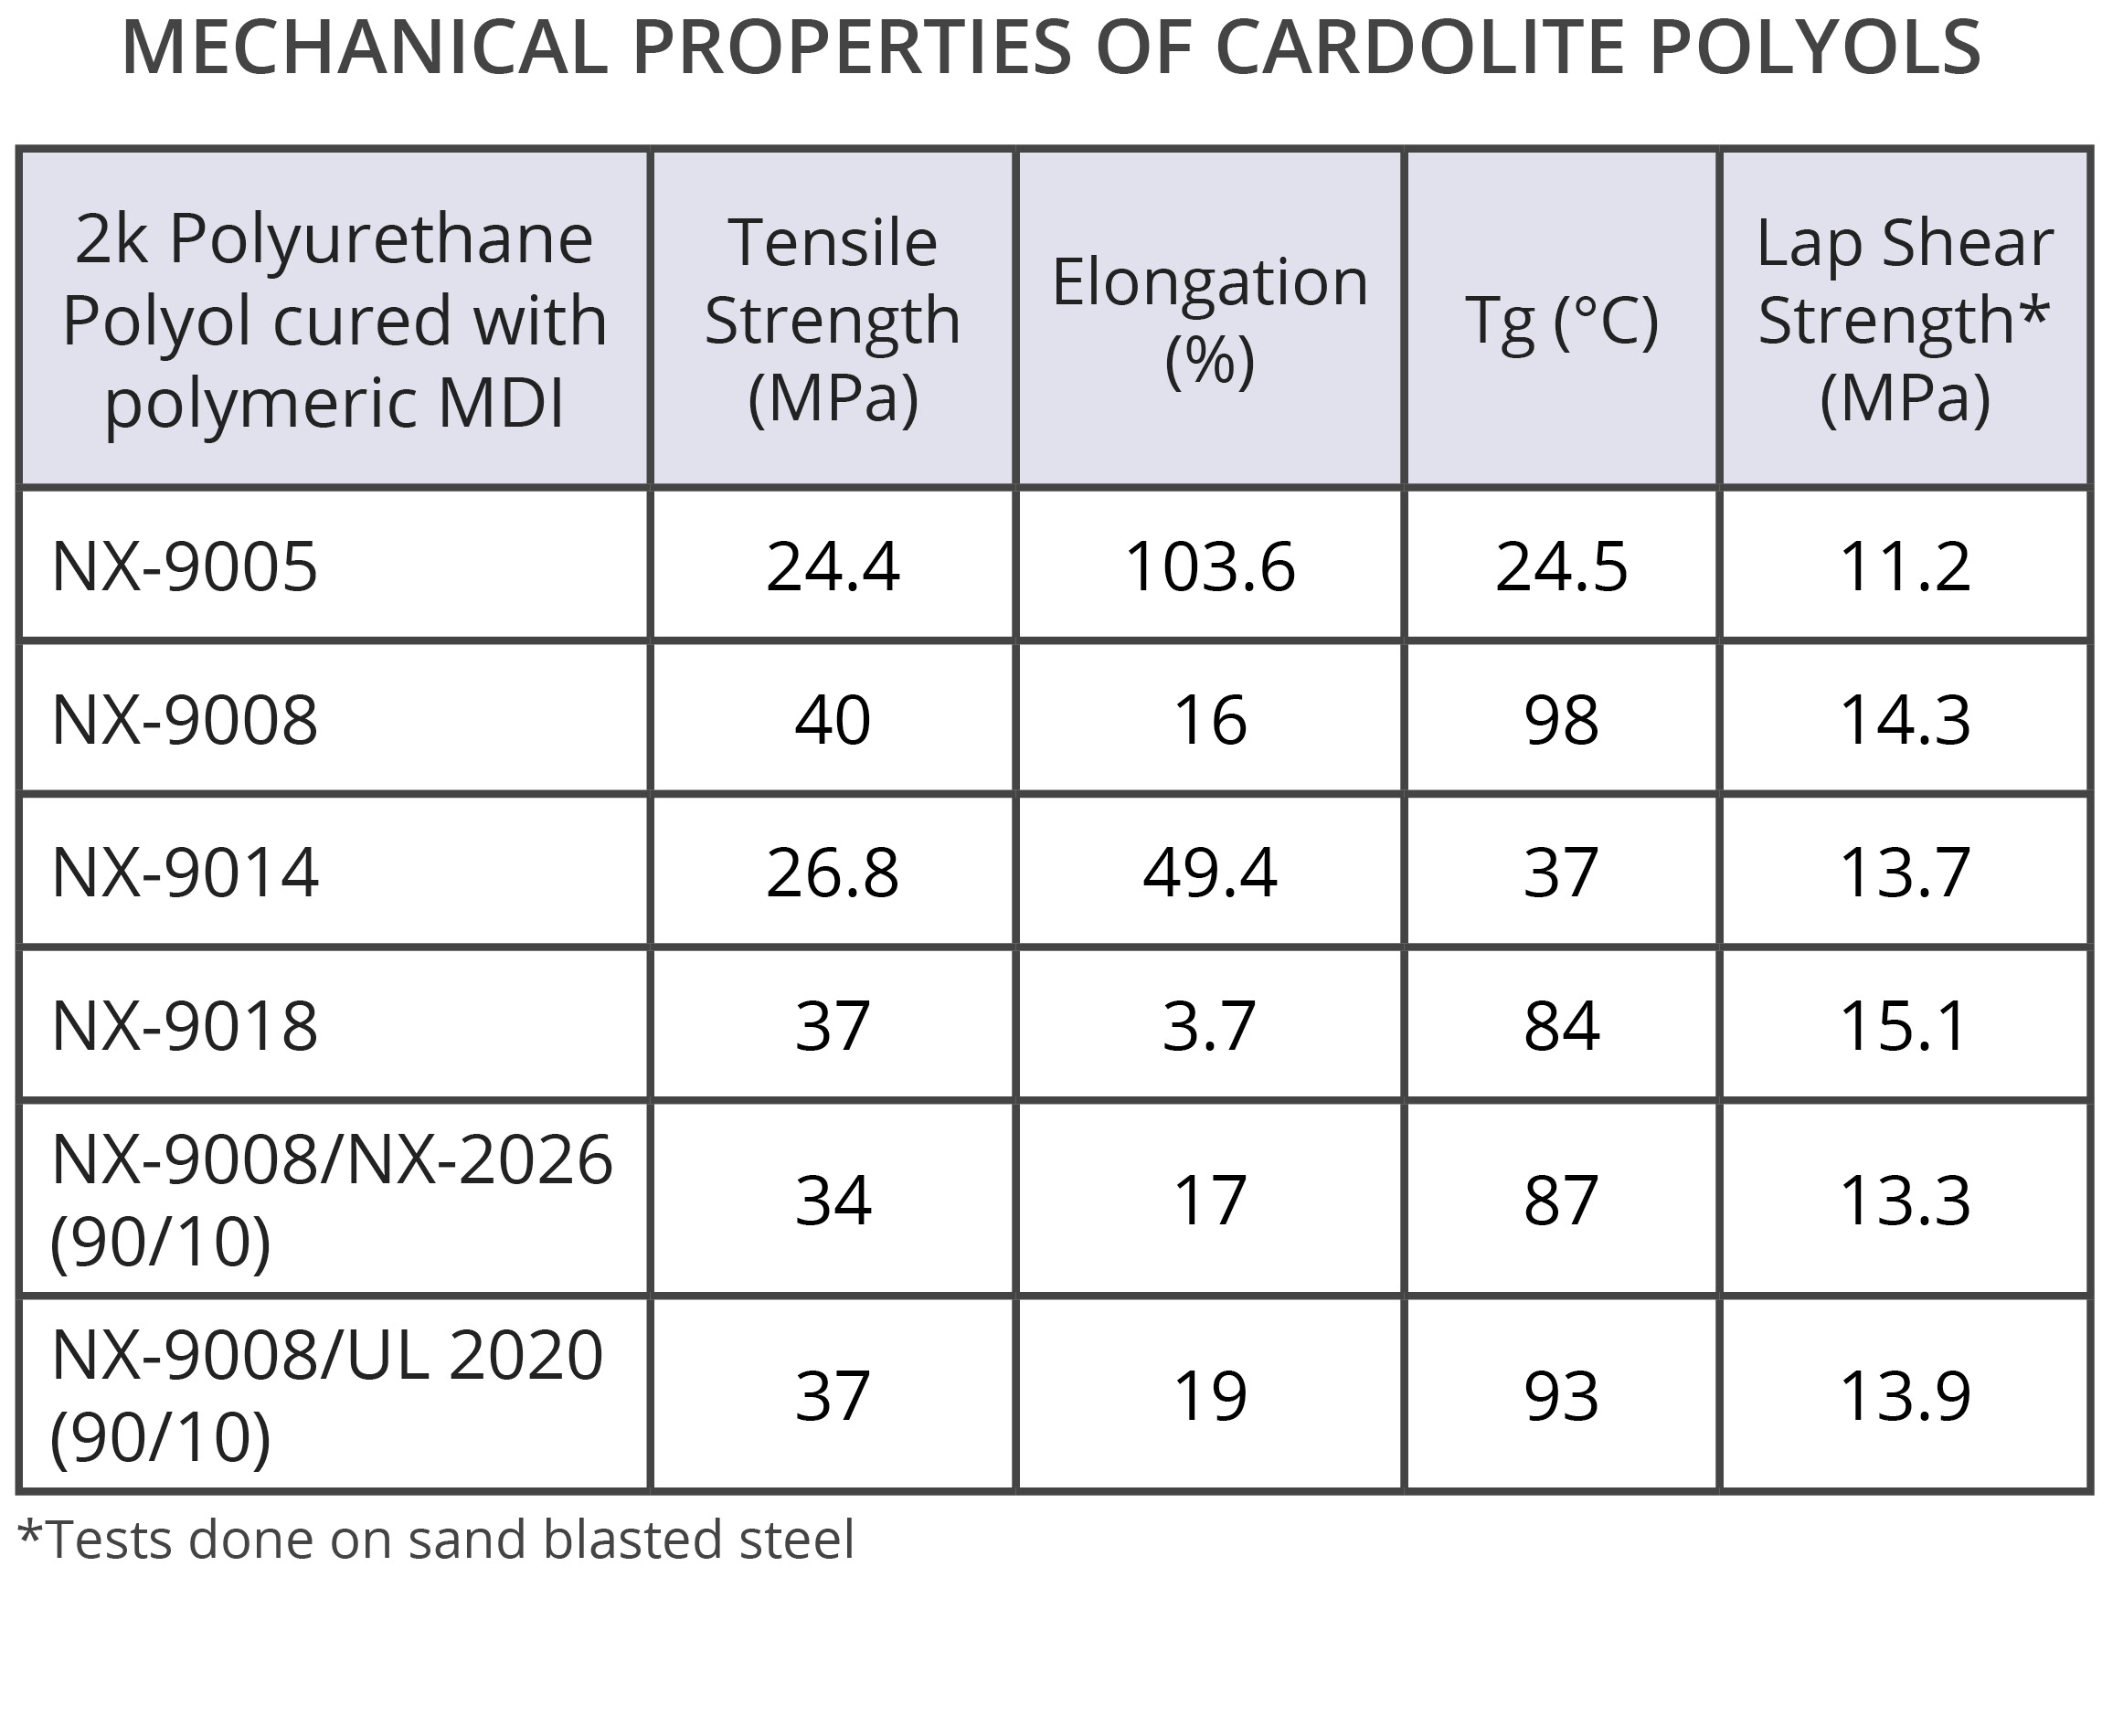 Cardolite renewable Polyols offer high mechanical strength for electric vehicle adhesives